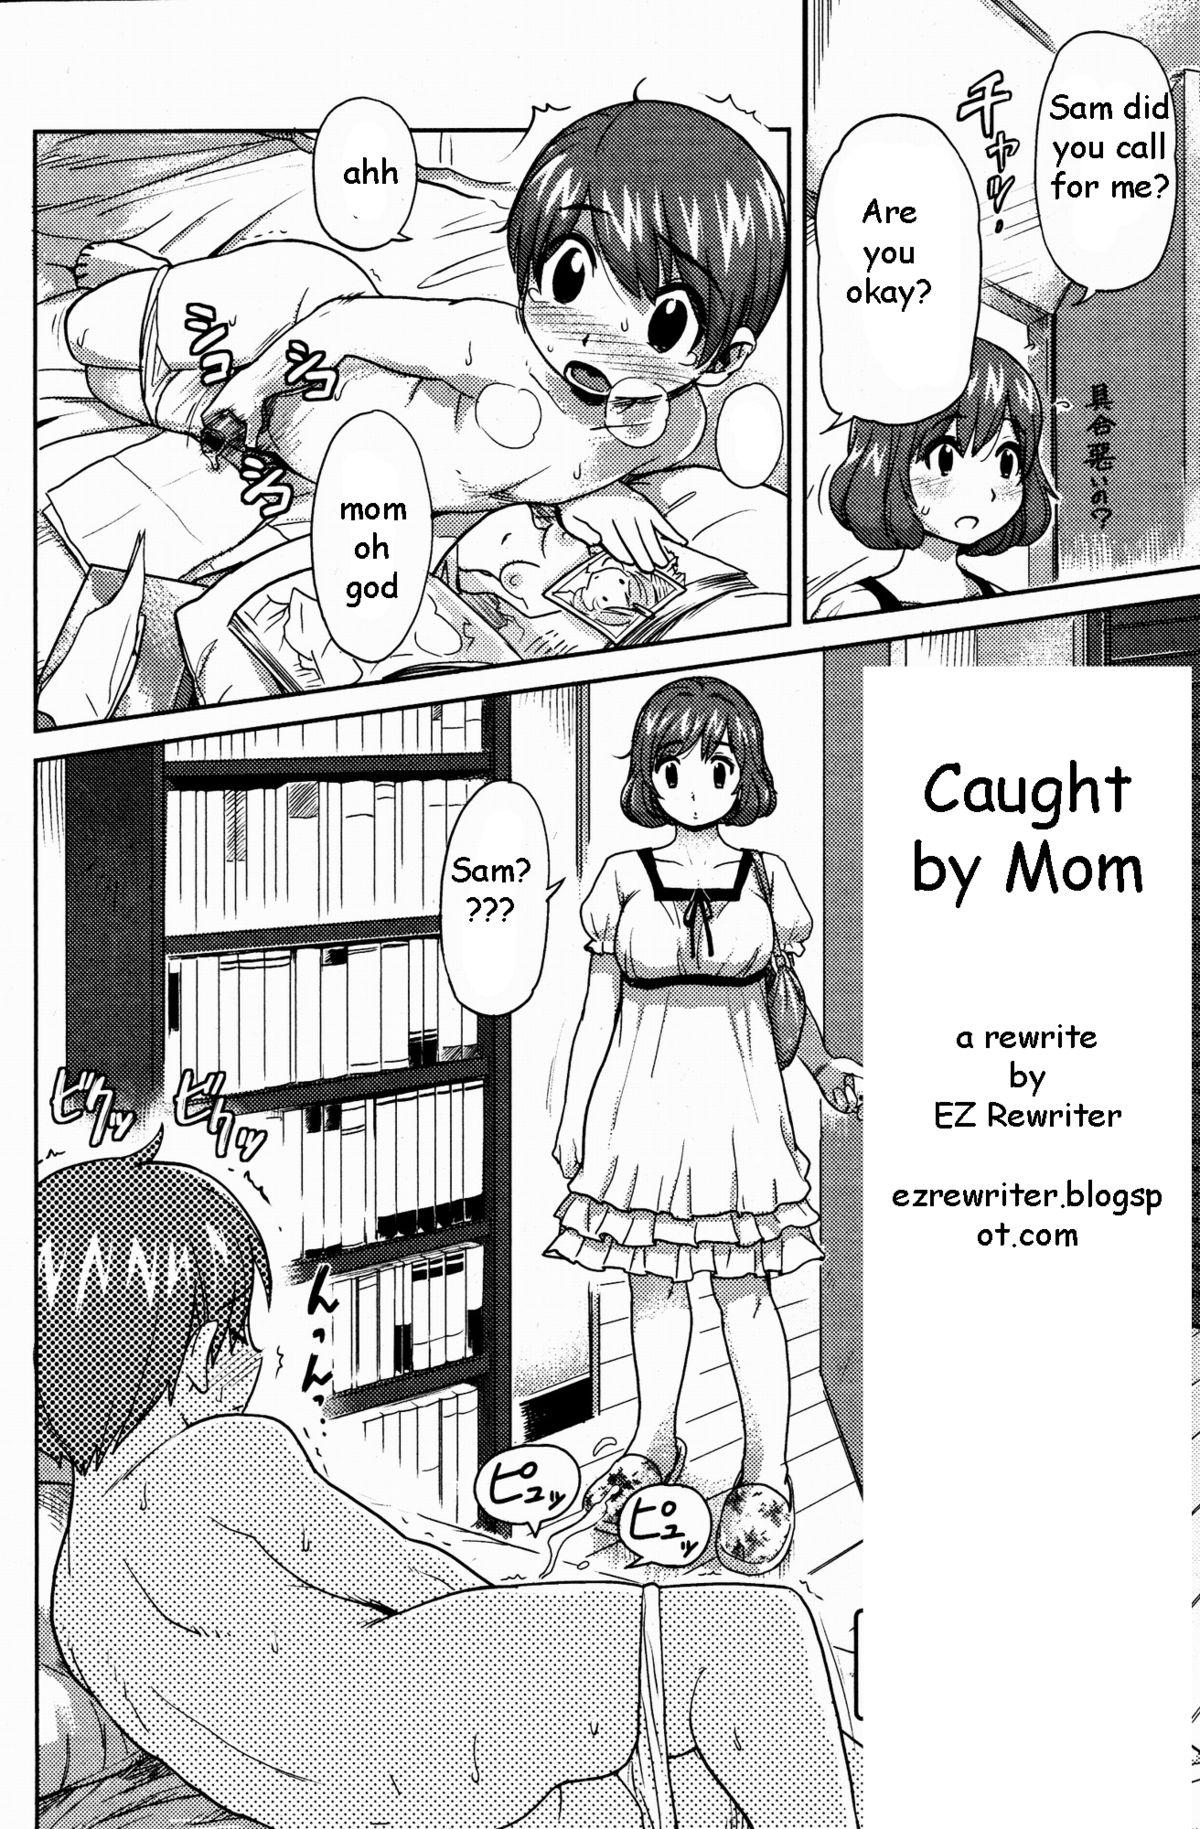 Caught by Mom 1